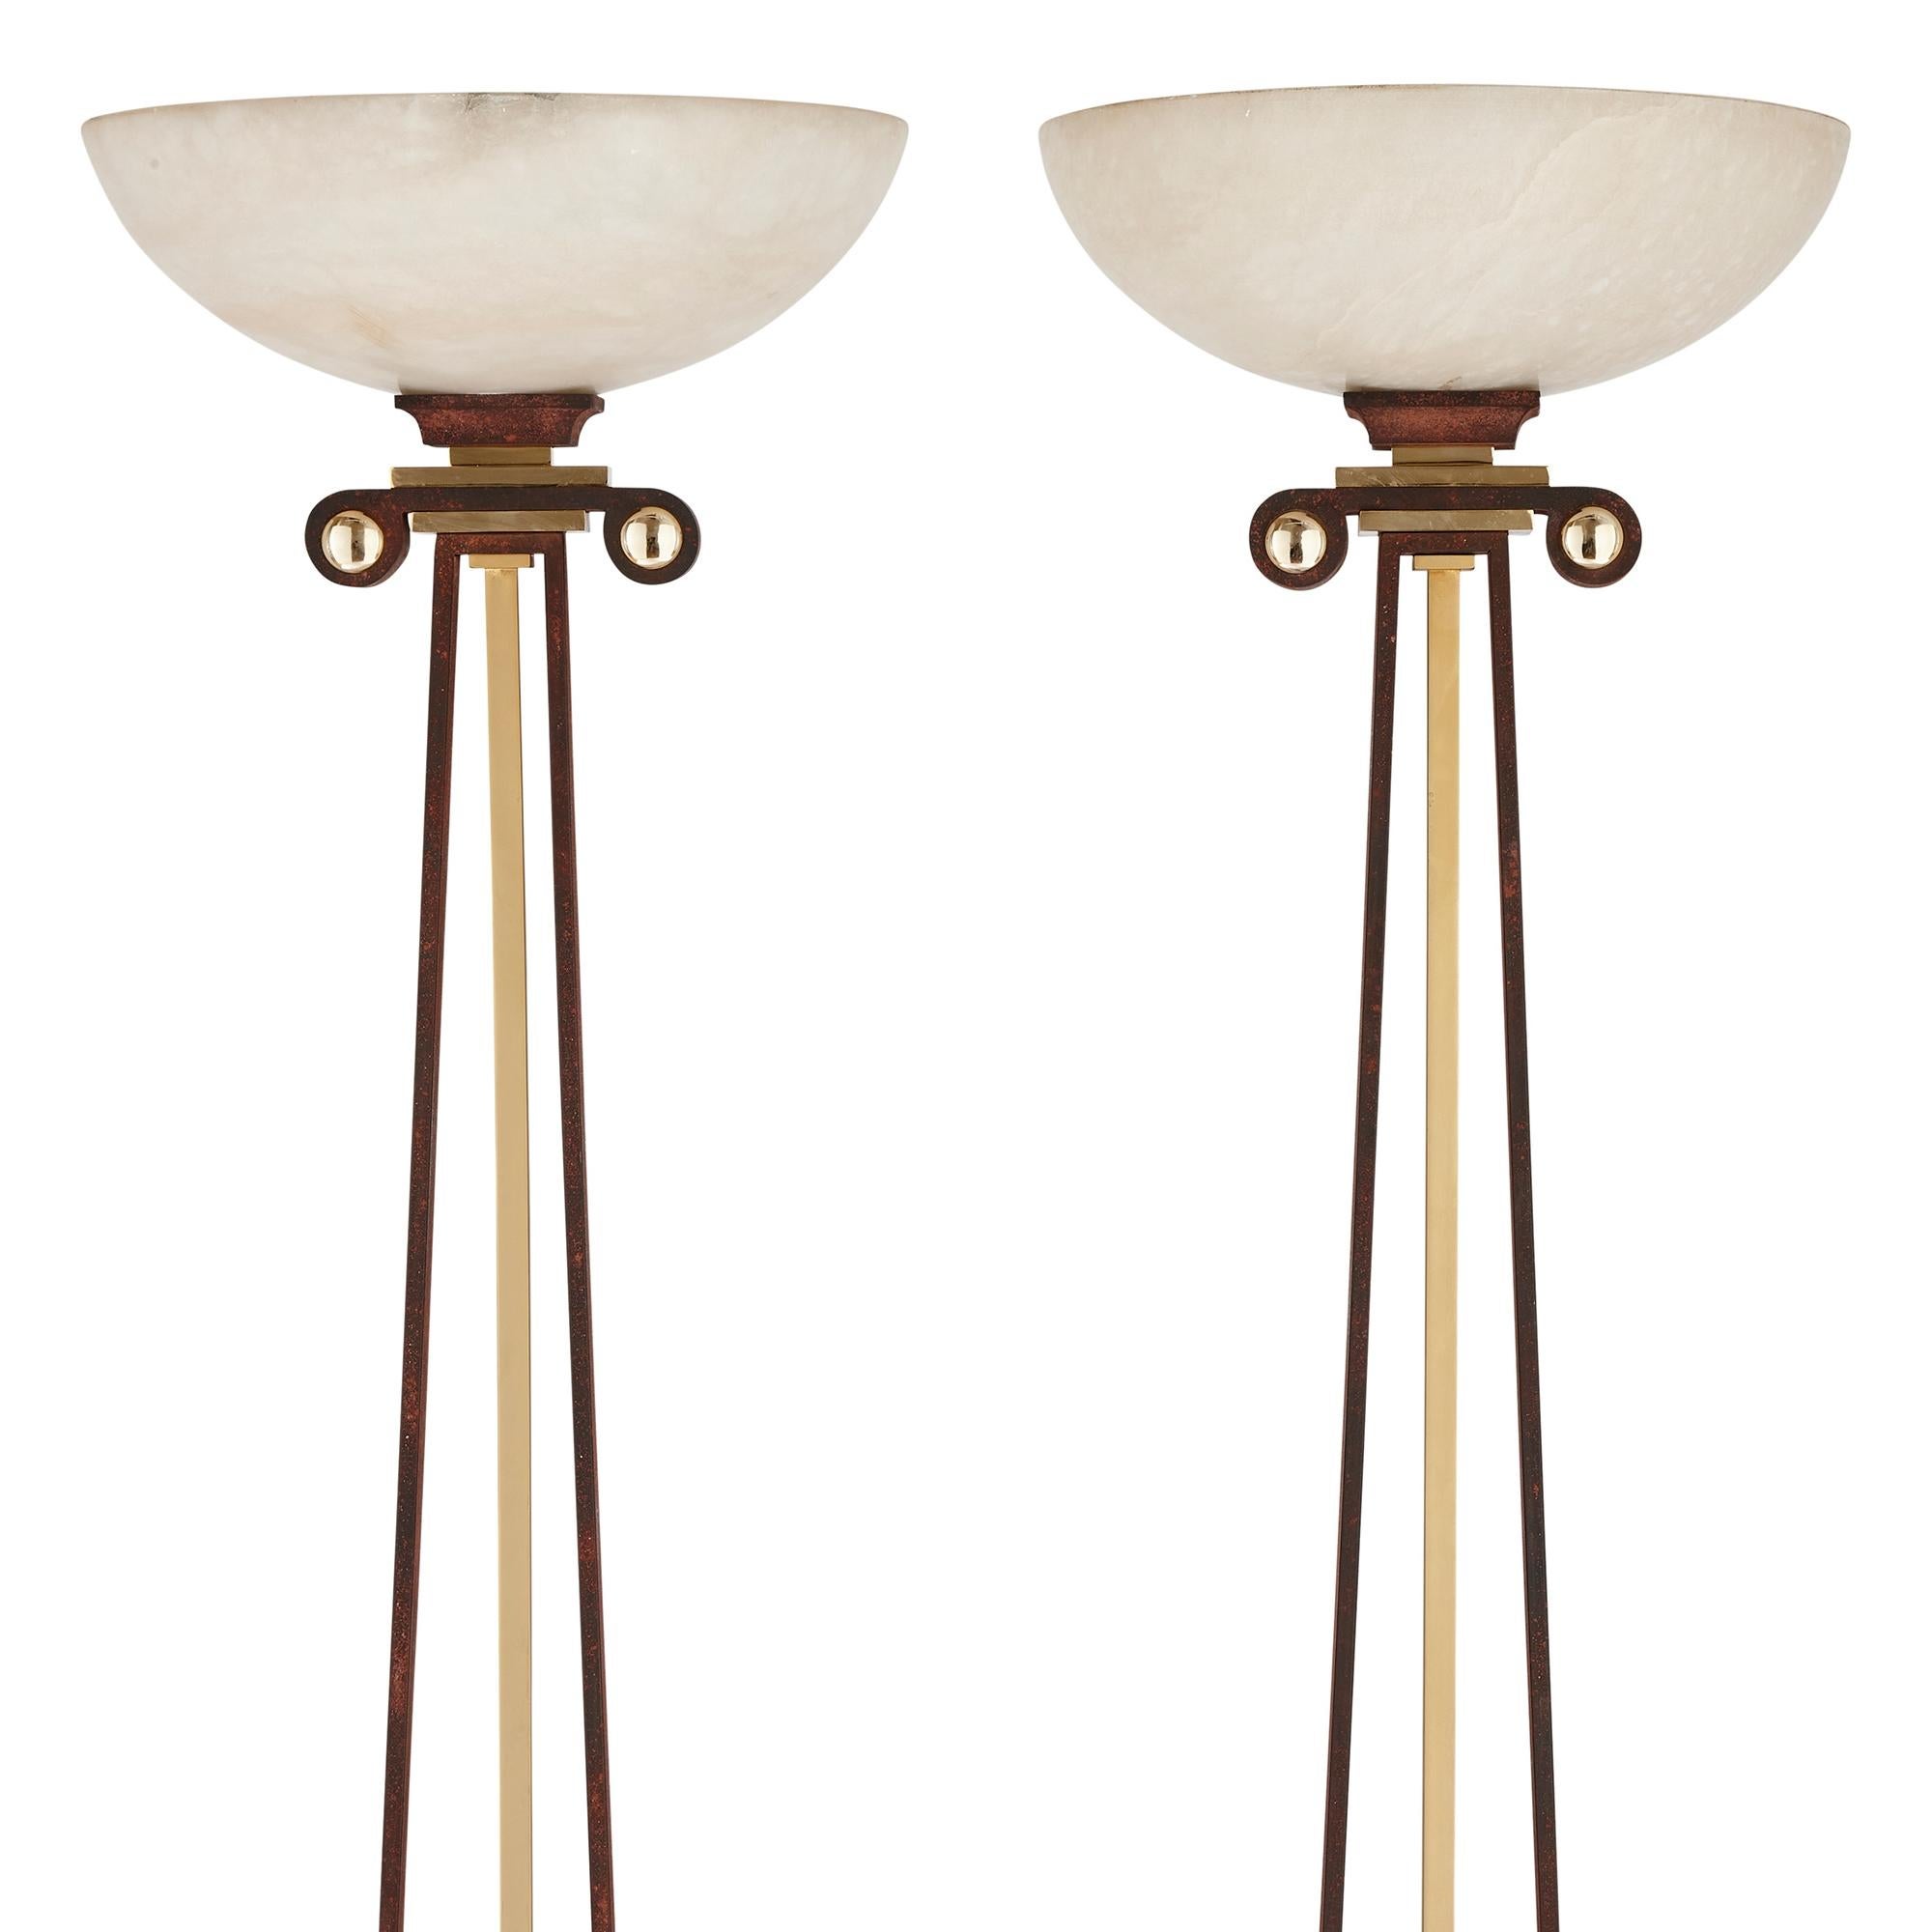 Pair of 20th century alabaster, gilt metal and iron floor lamps
Continental, 20th Century 
Height 185cm, diameter 40cm

Inspired by features of Greek architecture and made from a selection of high quality materials, the pair of floor lamps would add